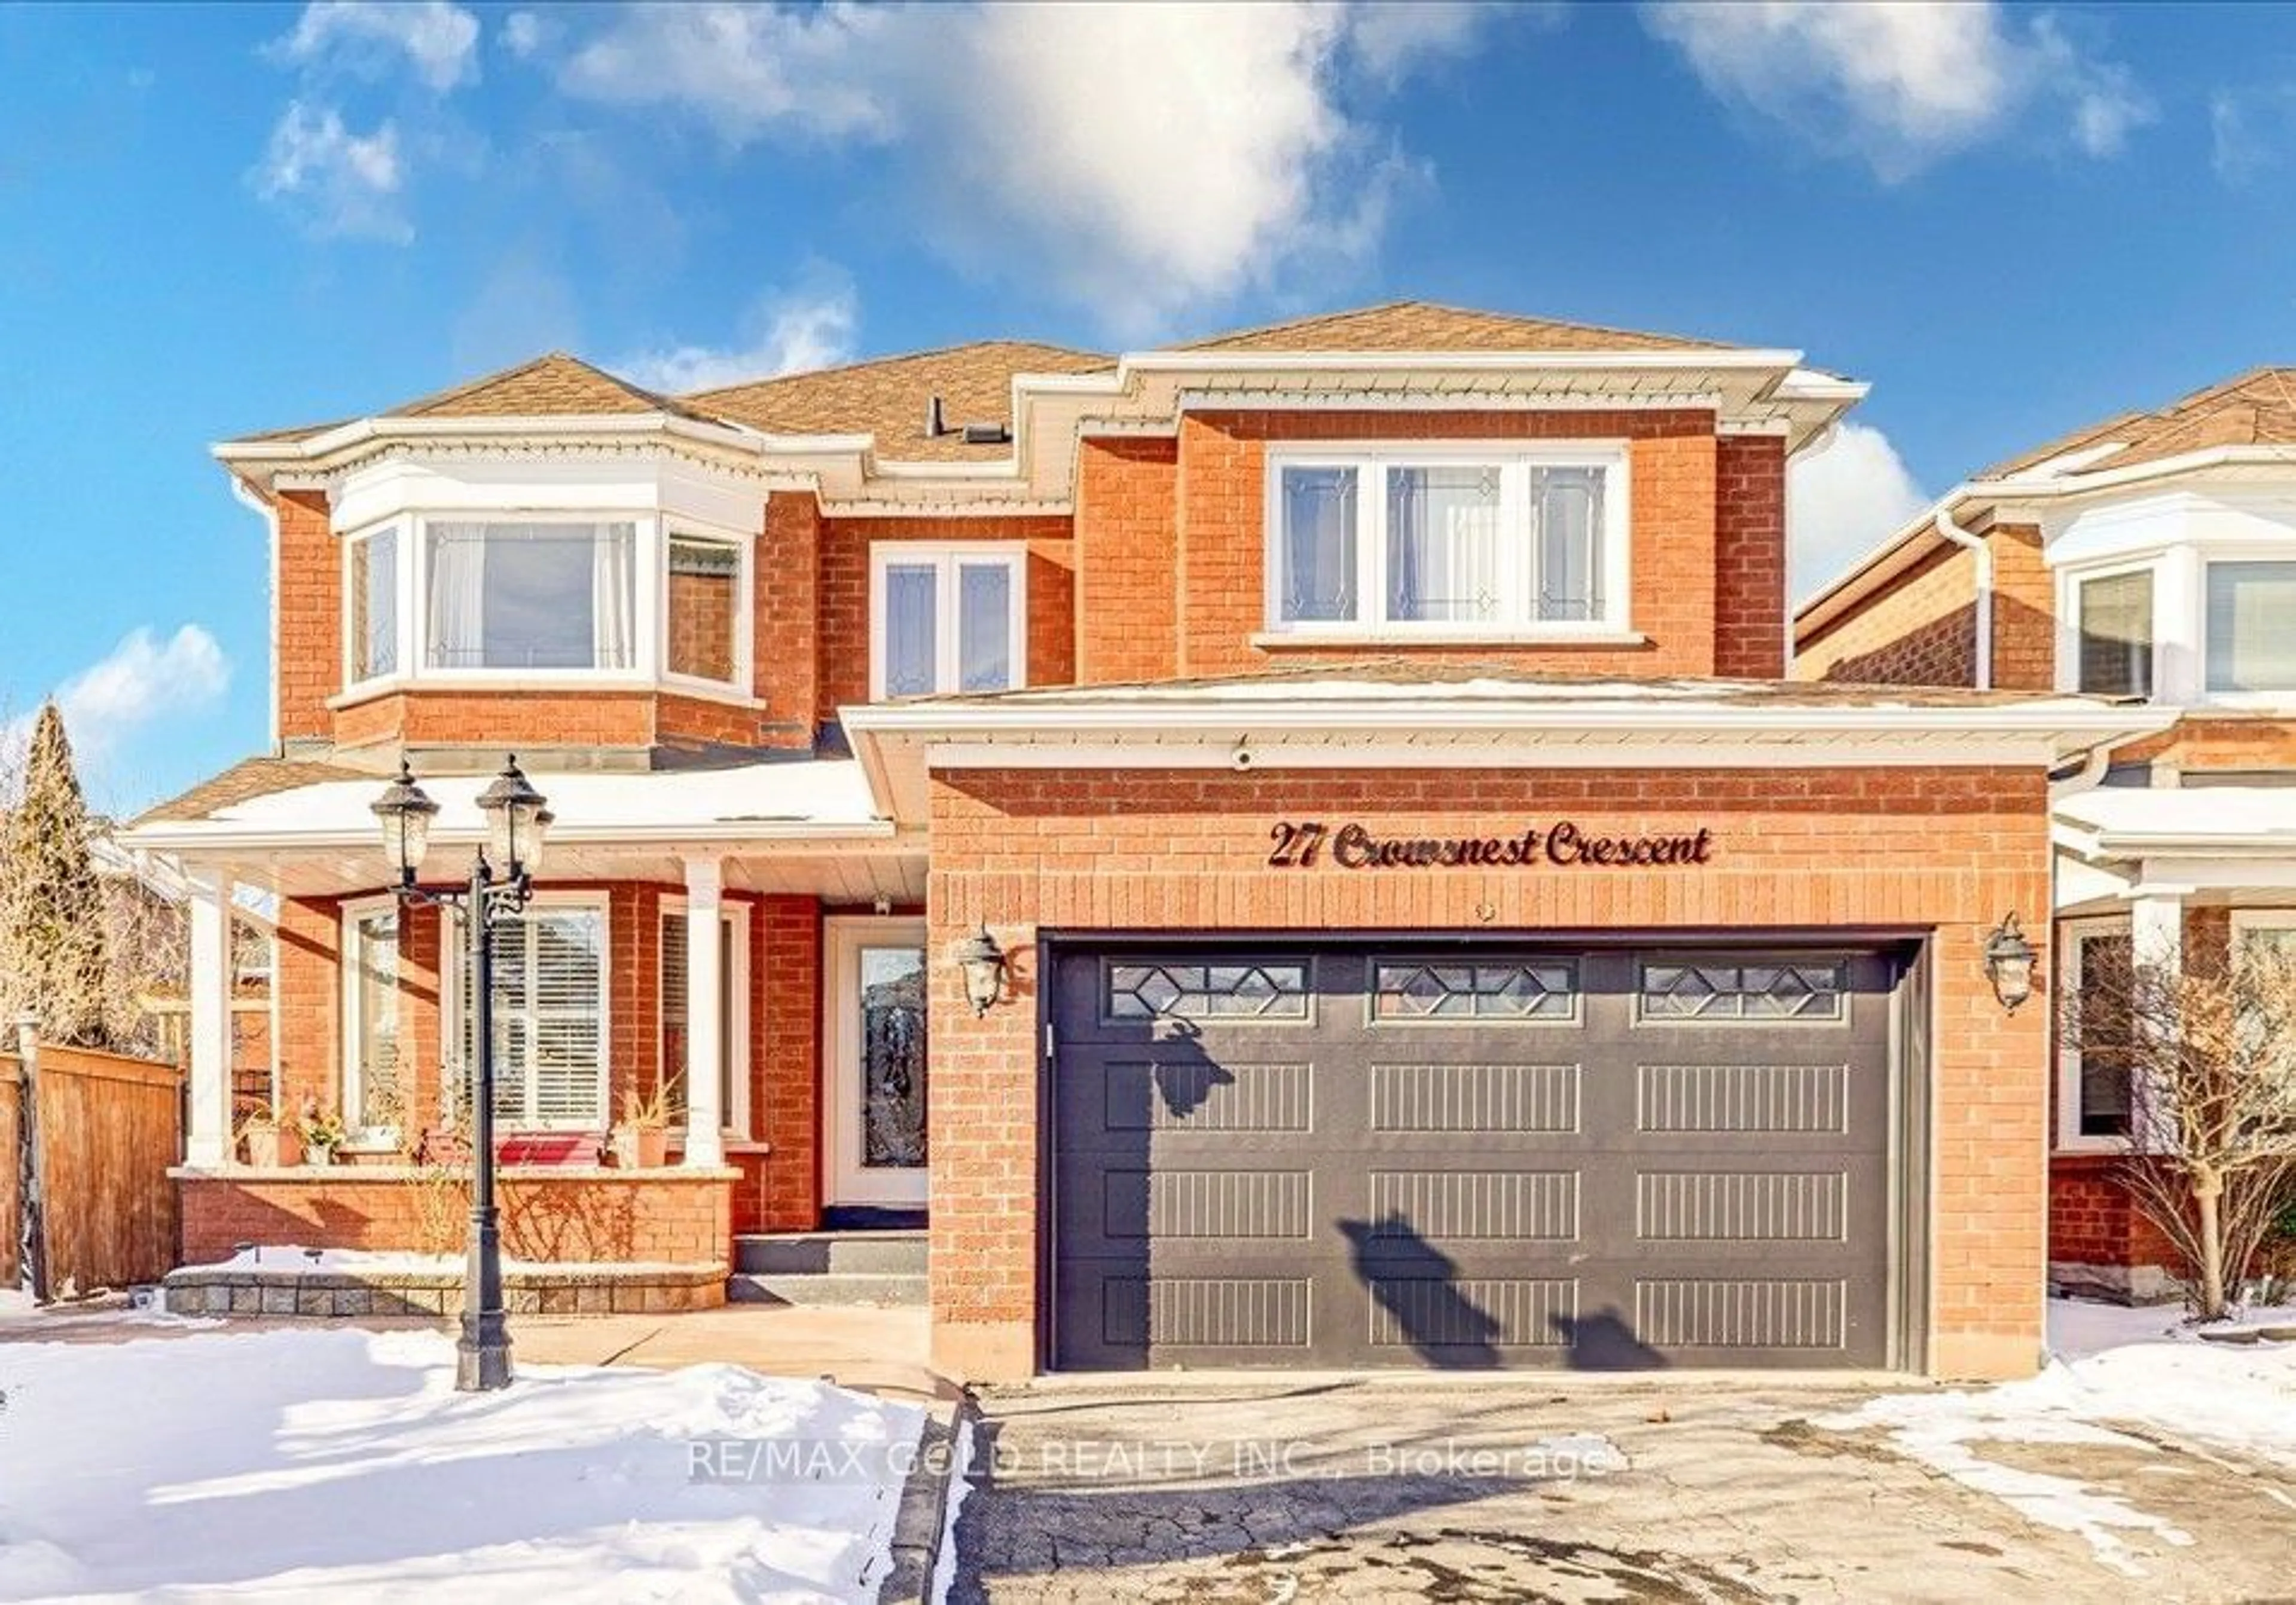 Home with brick exterior material for 27 Crowsnest Cres, Brampton Ontario L6R 1S8